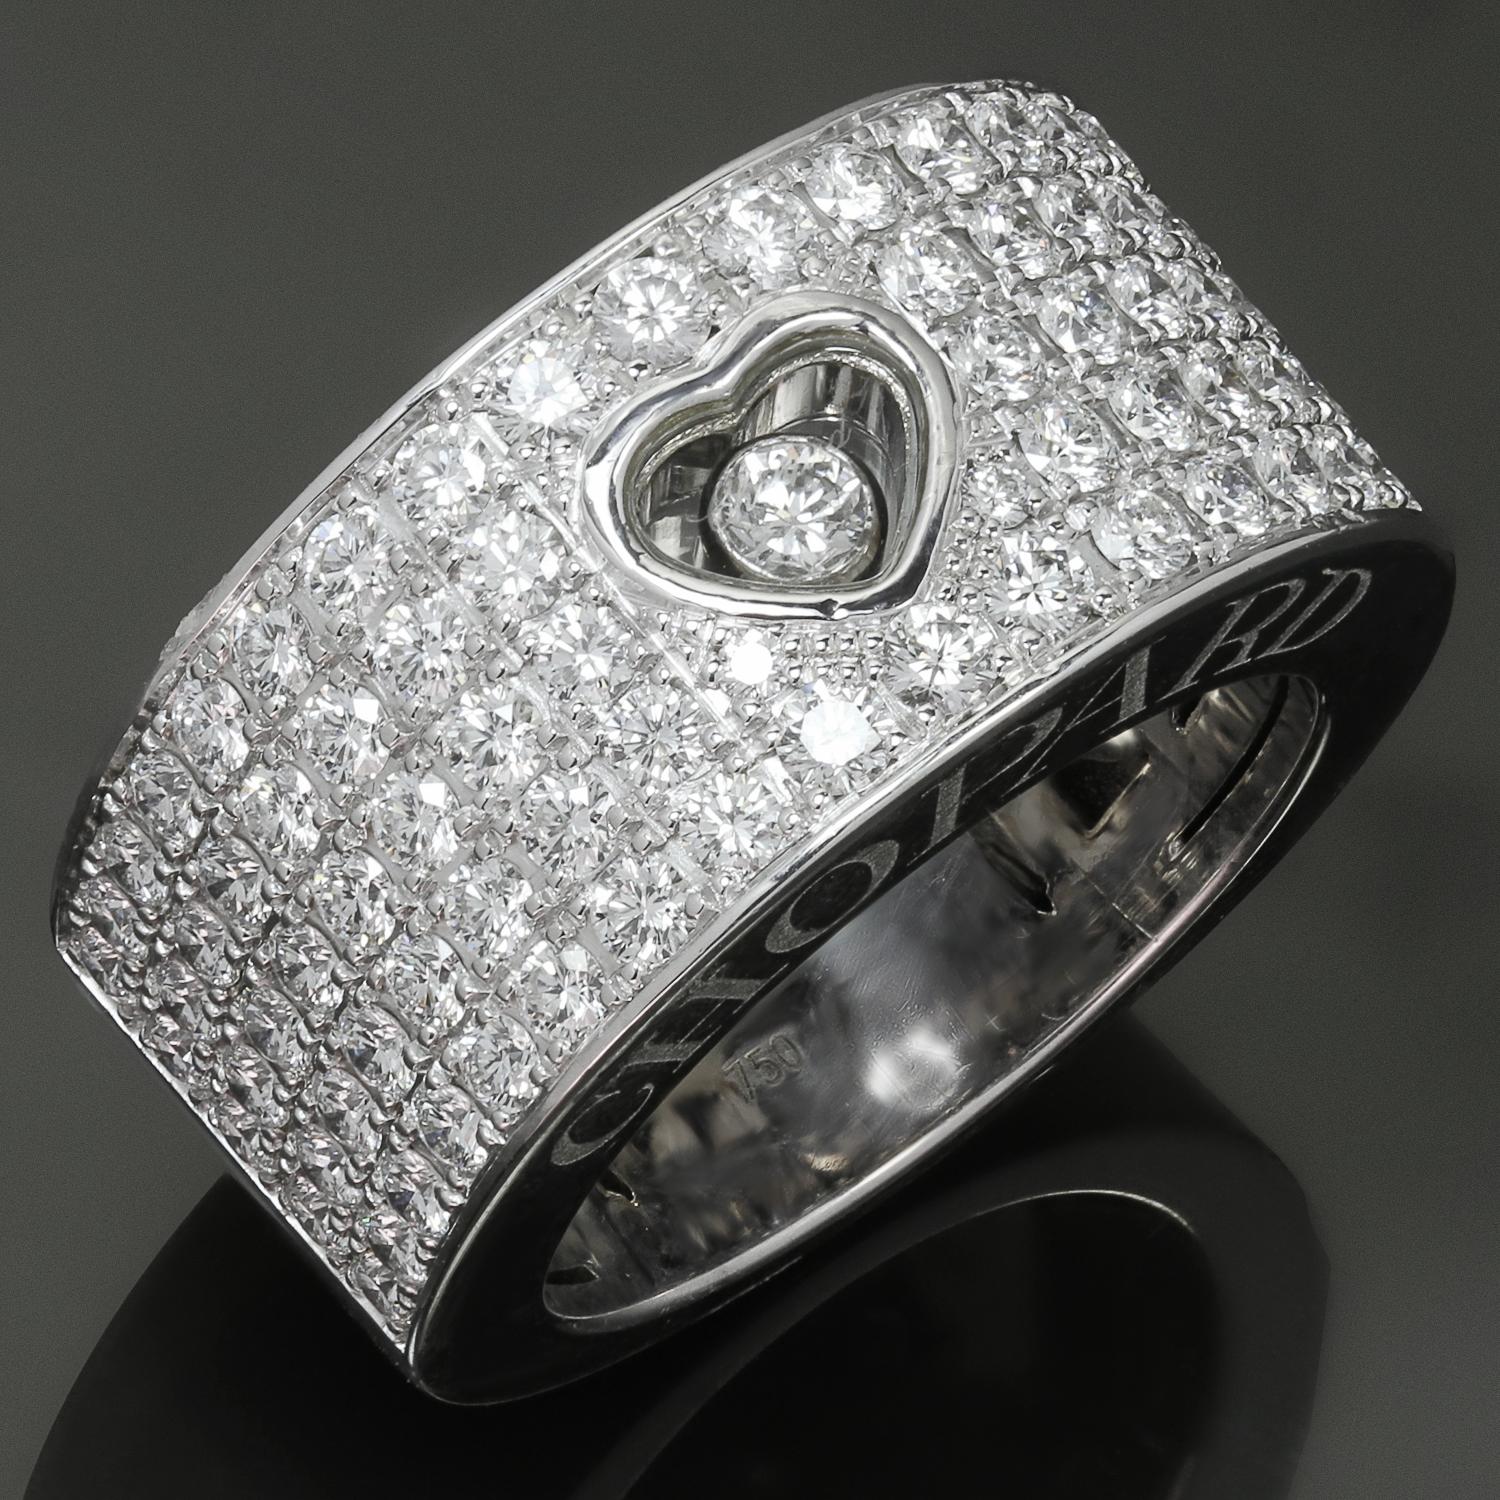 This fabulous Chopard band ring from the iconic Happy Diamond collection is crafted in 18k white gold and pave-set with 87 round brilliant E-F-G VVS1-VVS2 diamonds weighing an estimated 1.80 - 2.0 carats and accented with a Chopard-inscribed